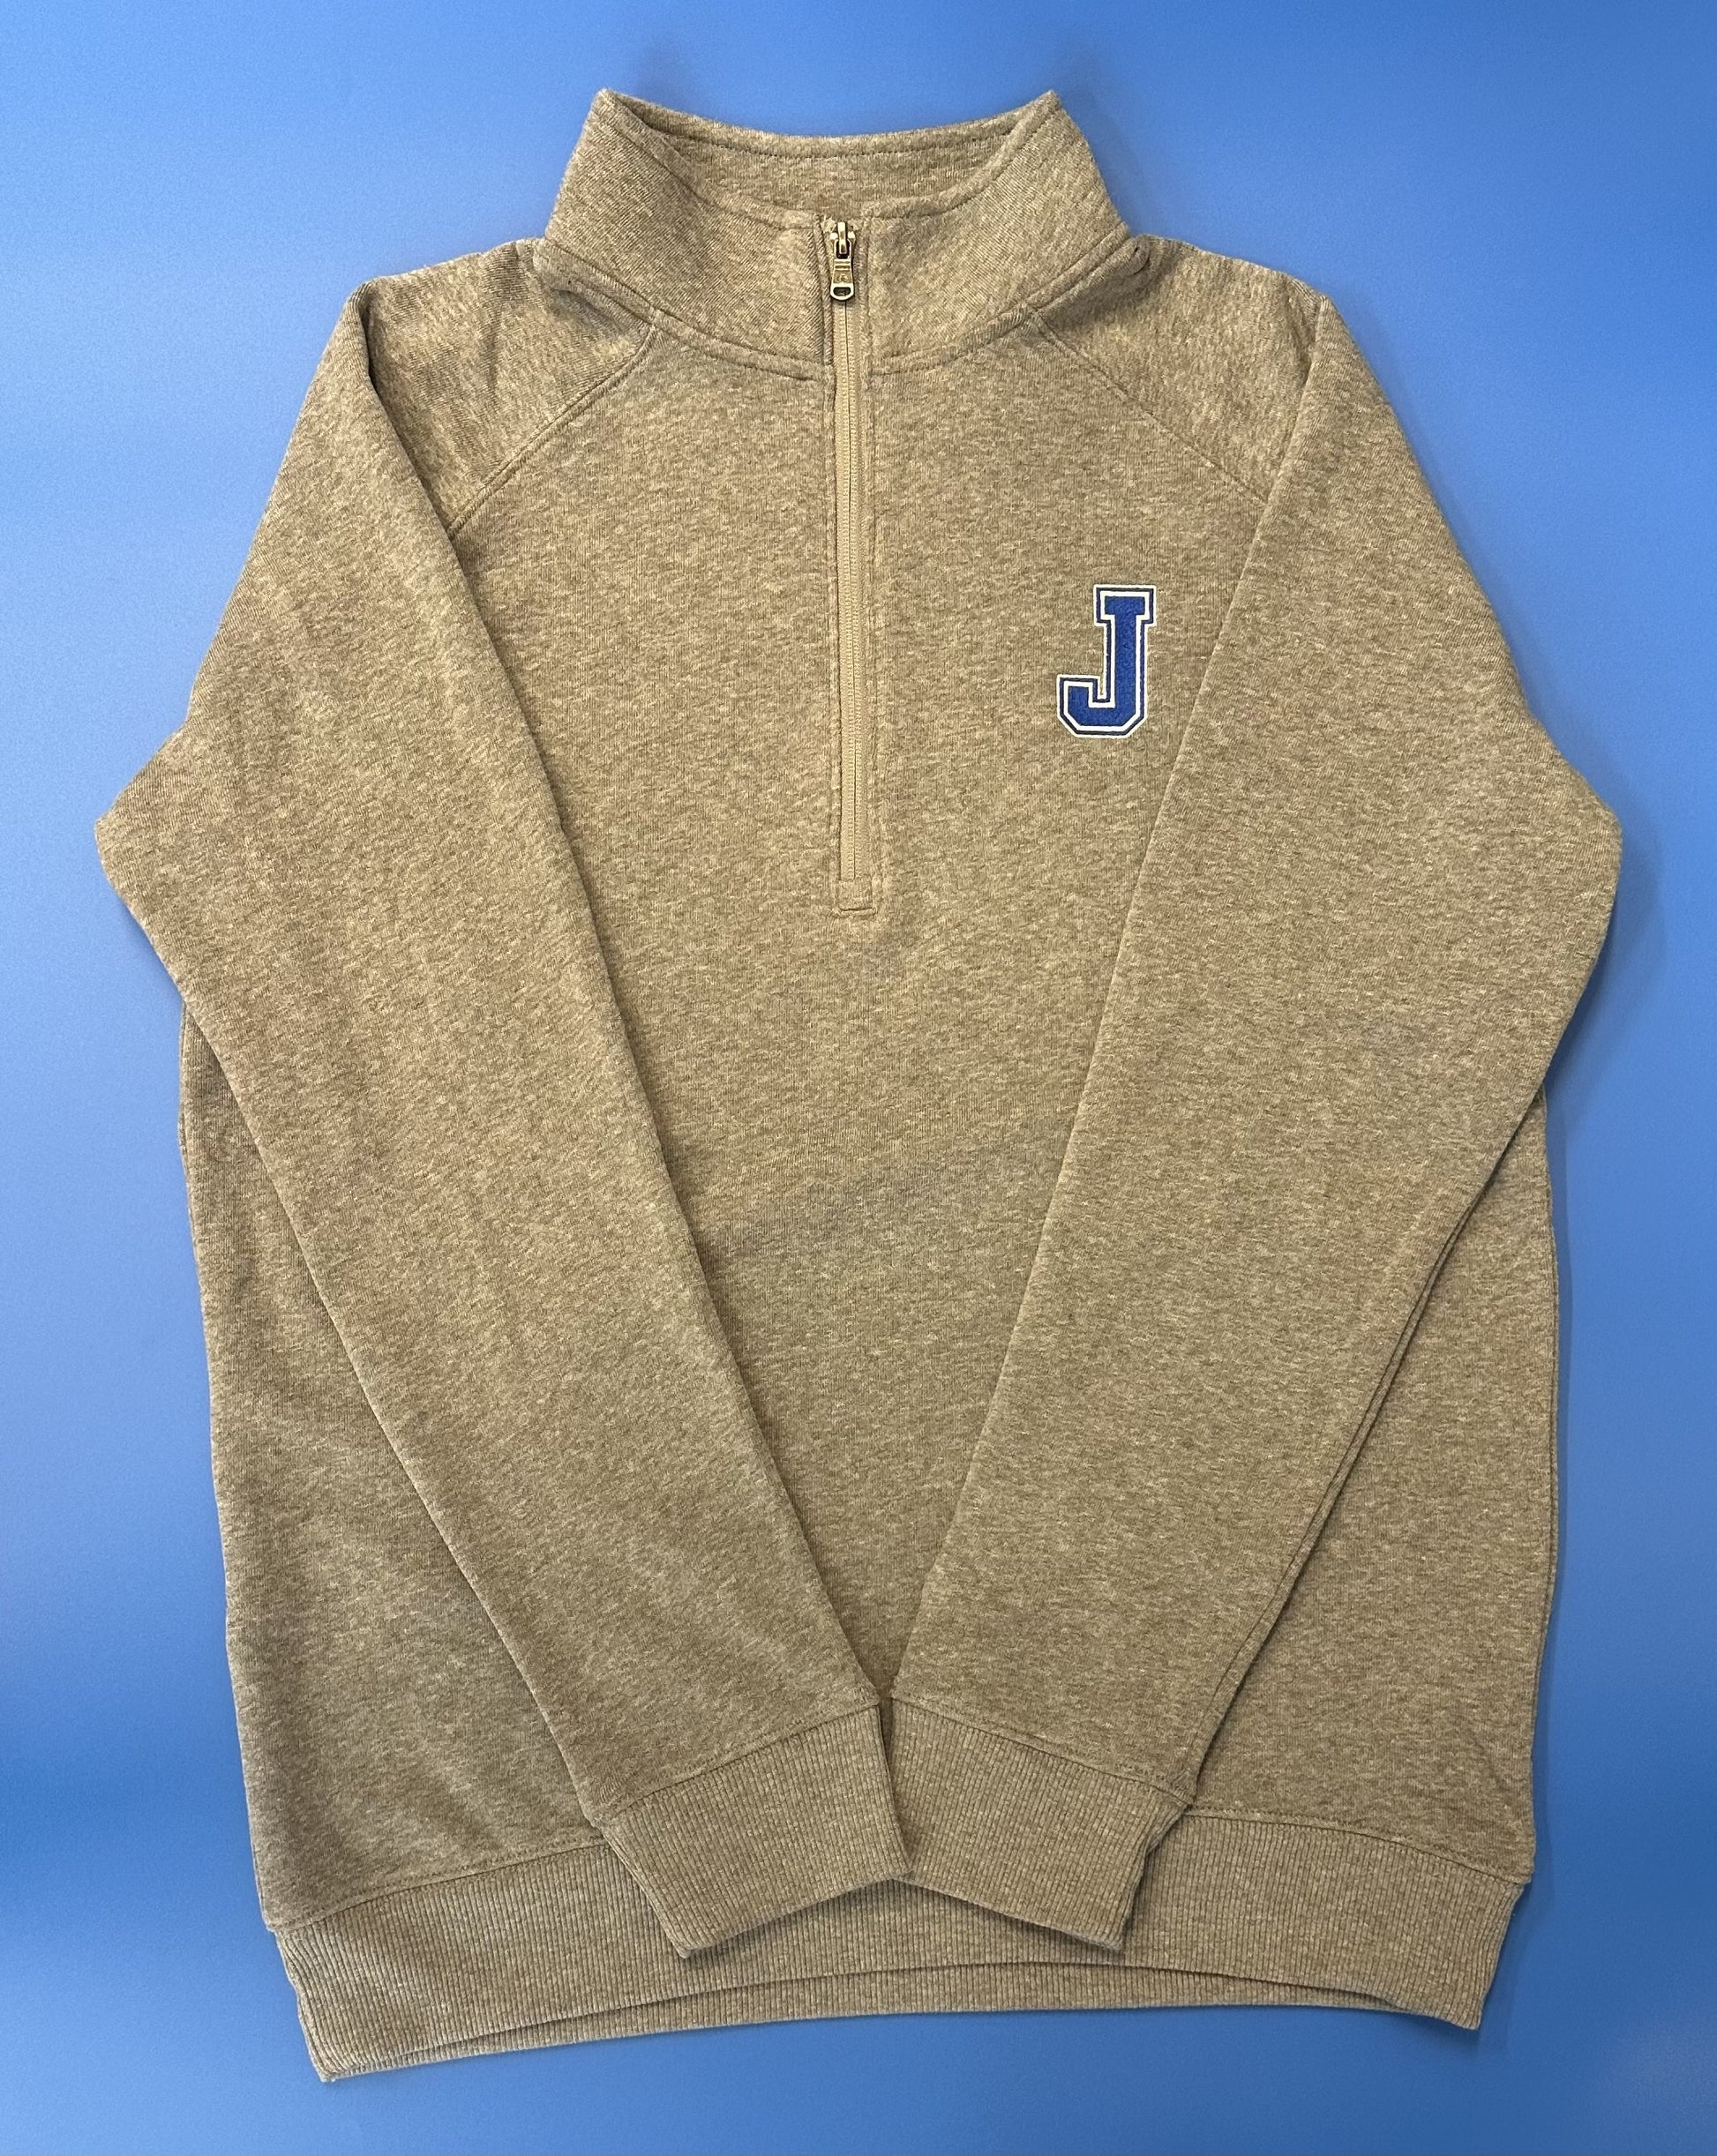 Champion.  47% polyester/39% cotton/14% rayon triblend fleece  Classic raglan silhouette with stand collar.  Color matched reverse coil zipper at center front.  2 x 2 rib at cuffs & waistband.  Embroidered J logo.